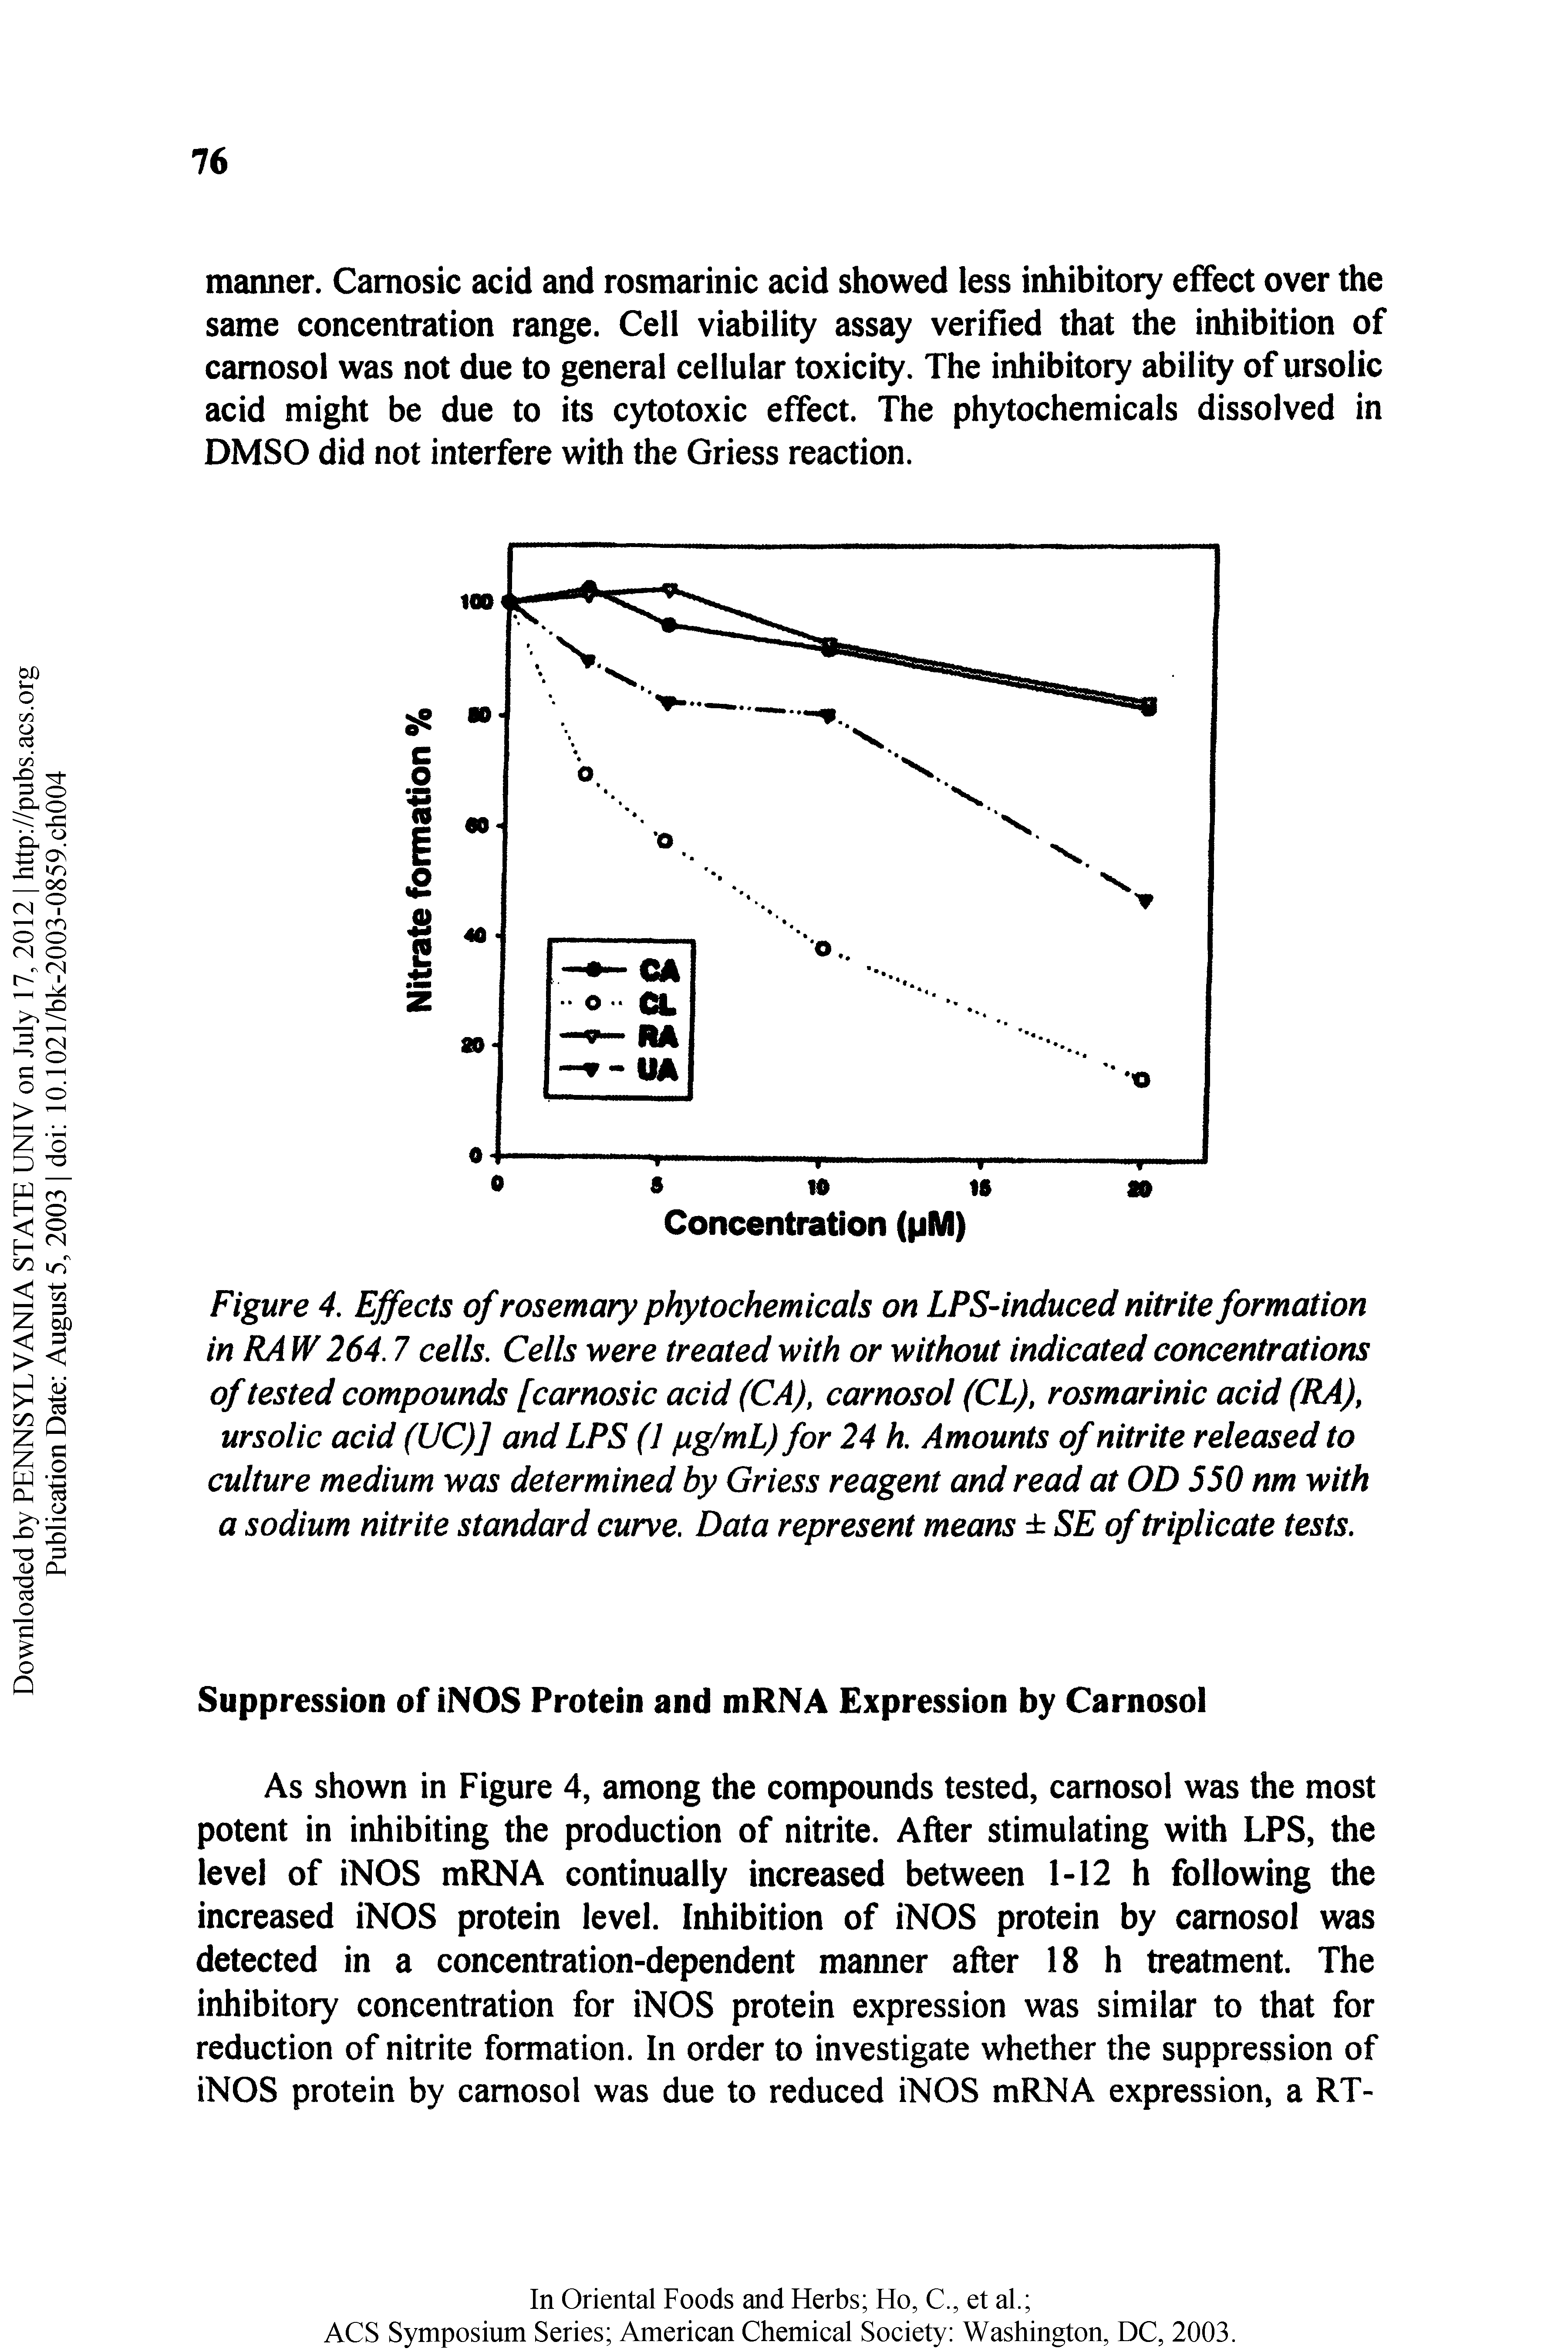 Figure 4. Effects of rosemary phytochemicals on LPS-induced nitrite formation in RAW 264.7 cells. Cells were treated with or without indicated concentrations of tested compounds [carnosic acid (CA), carnosol (CL), rosmarinic acid (RA), ursolic acid (UC)] and LPS (1 pg/mL) for 24 h. Amounts of nitrite released to culture medium was determined by Griess reagent and read at OD 550 nm with a sodium nitrite standard curve. Data represent means SE of triplicate tests.